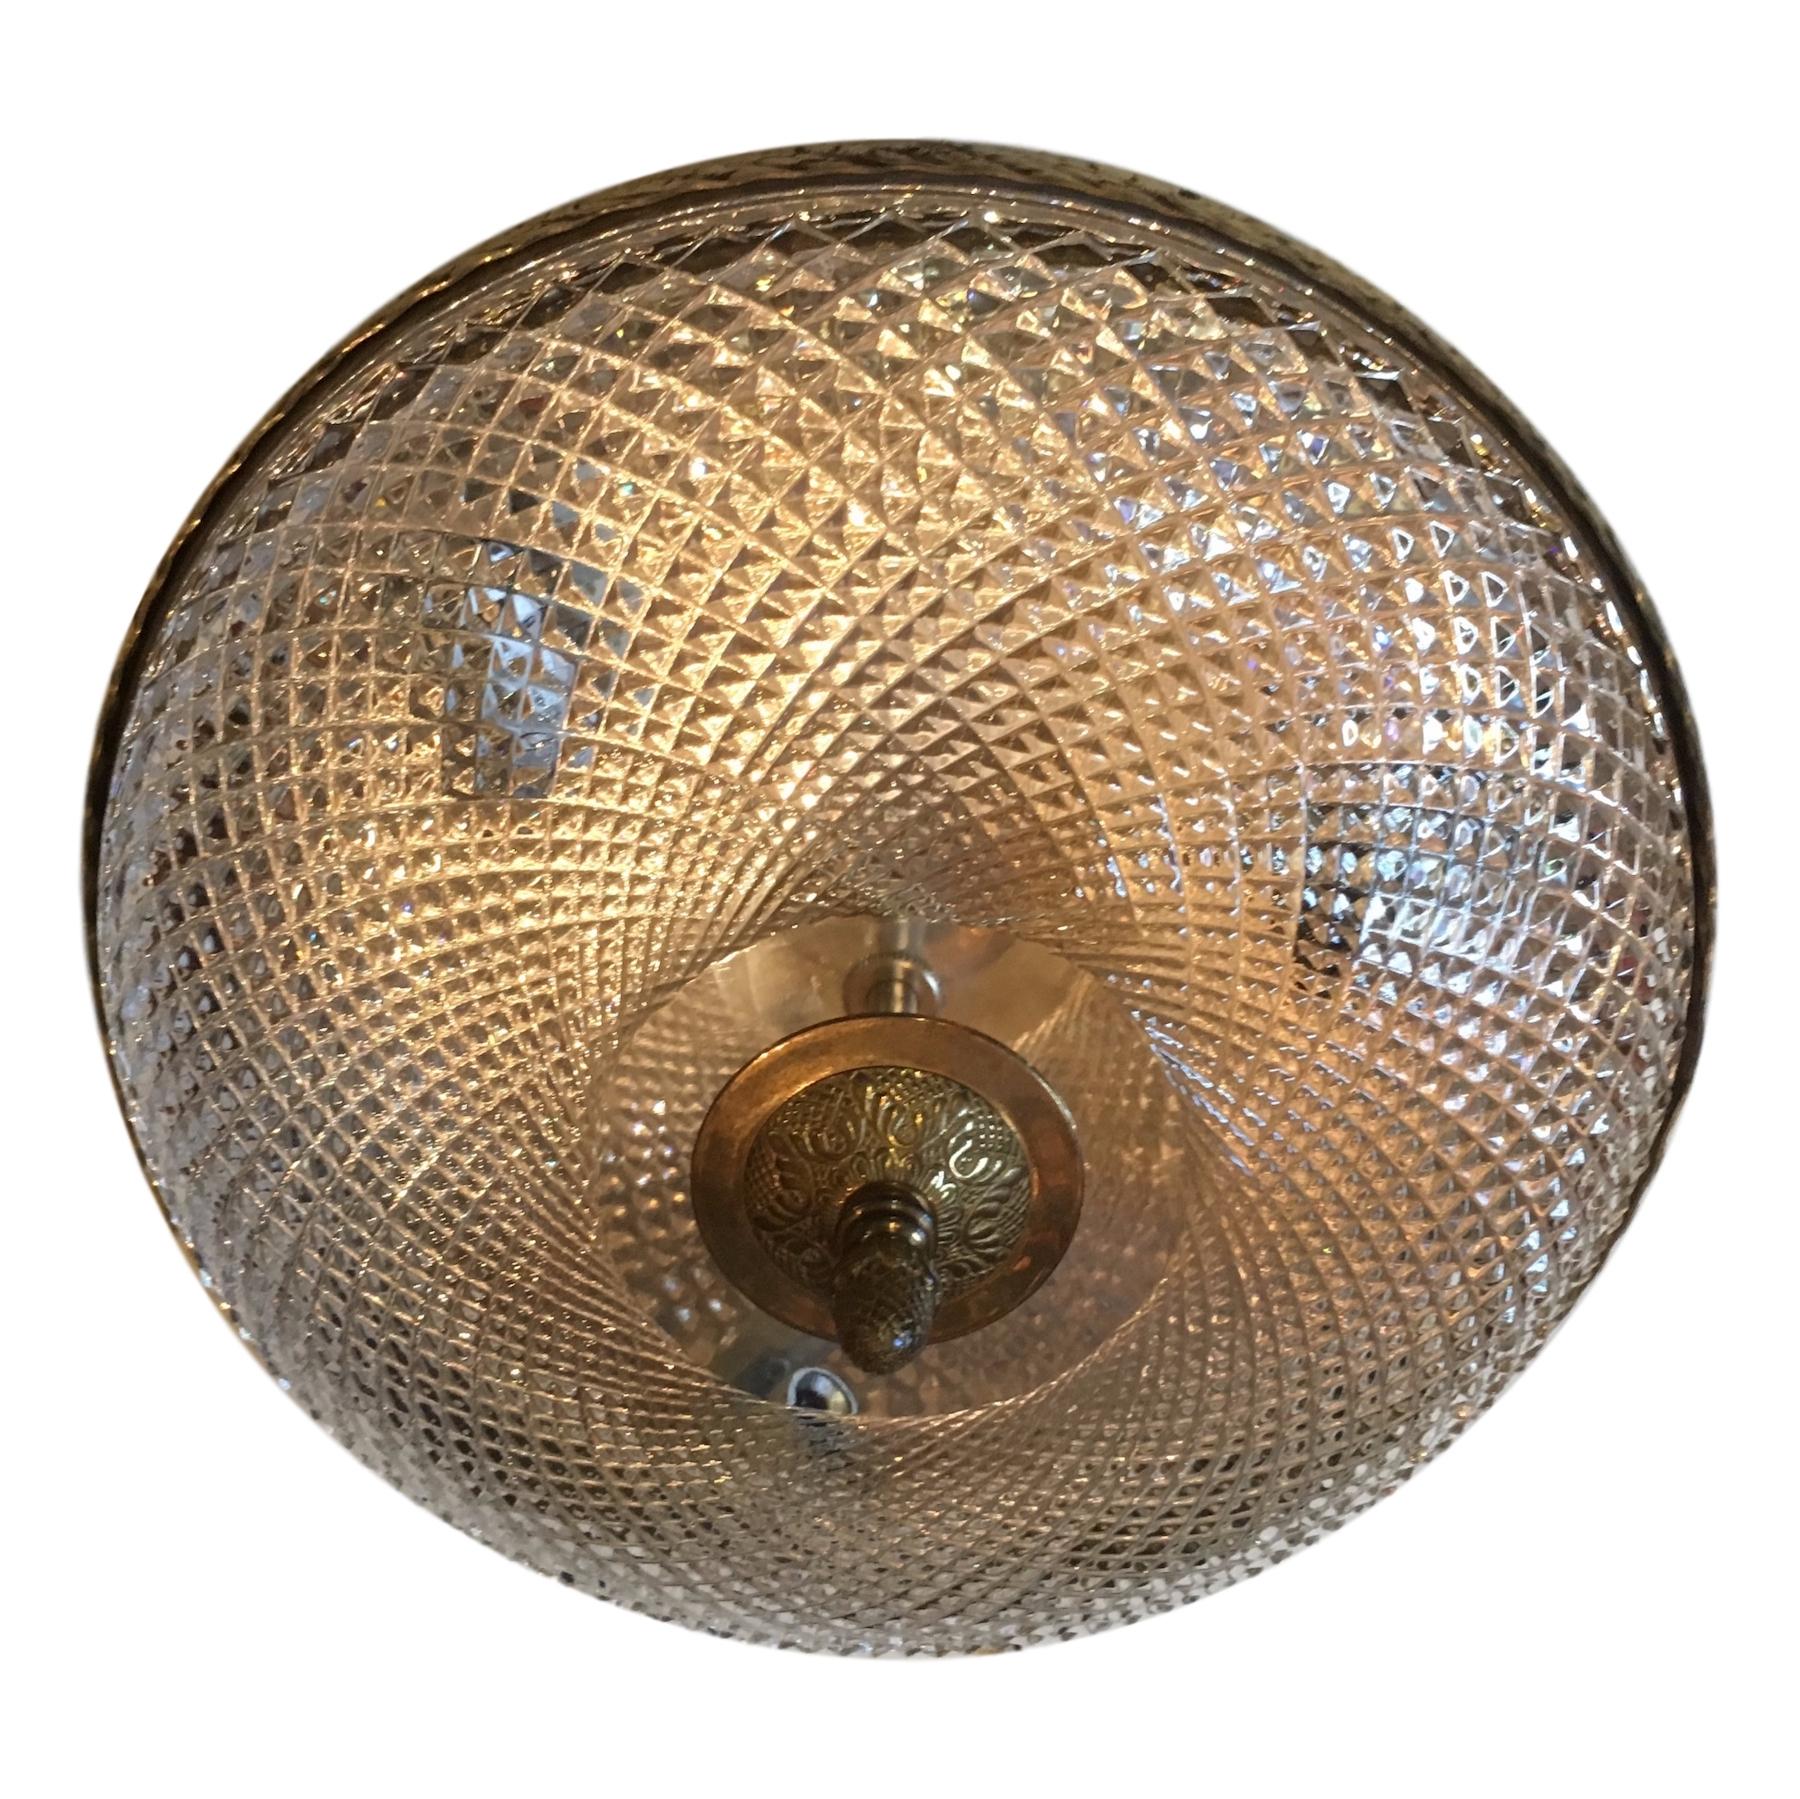 A circa 1930s French crystal flush-mounted ceiling fixture with bronze fittings and interior lights.

Measurements:
Diameter 12?
Drop 4?